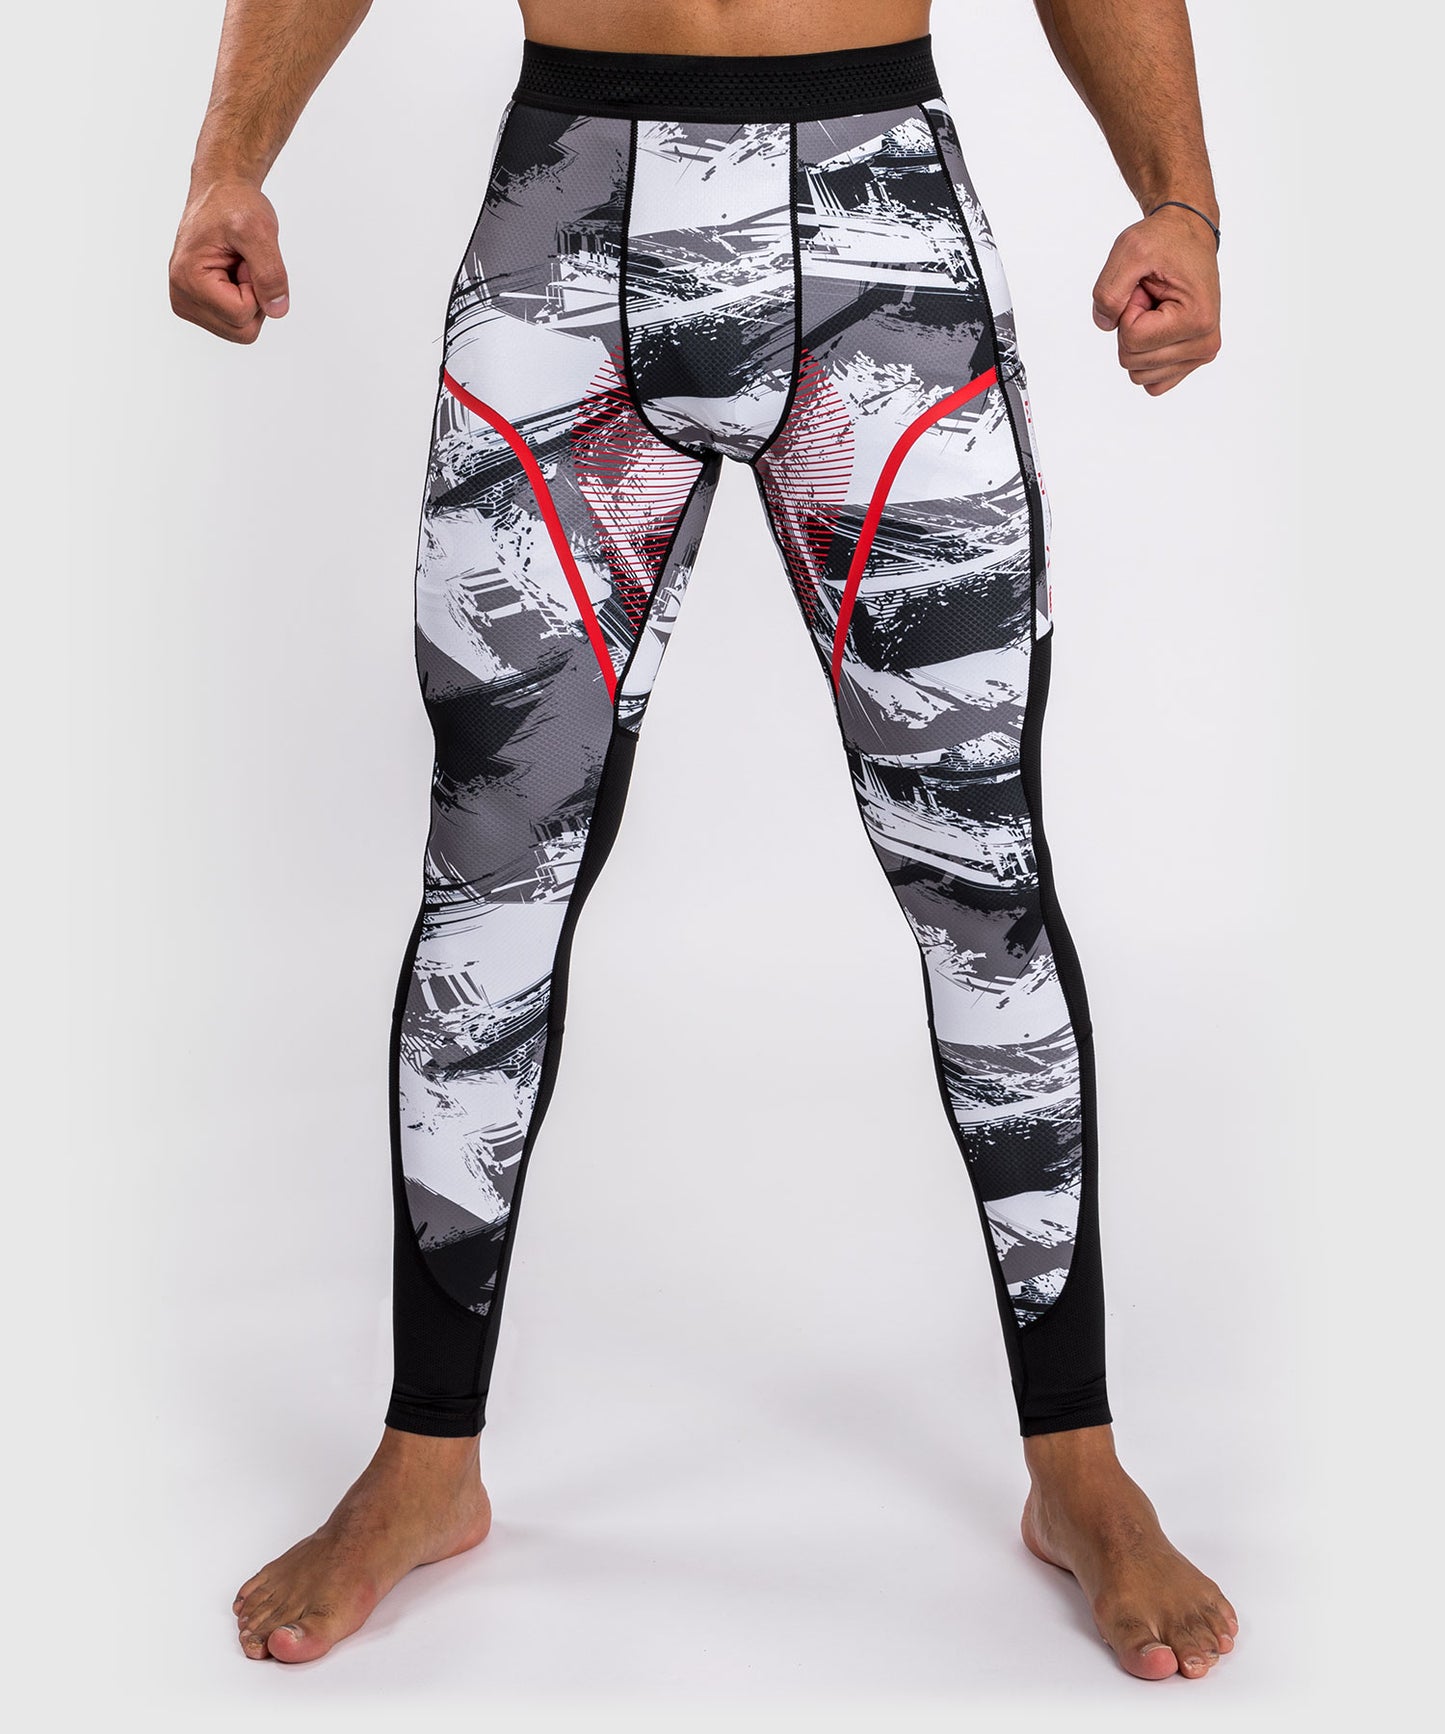 Venum Electron 3.0 Spats - Grey/Red